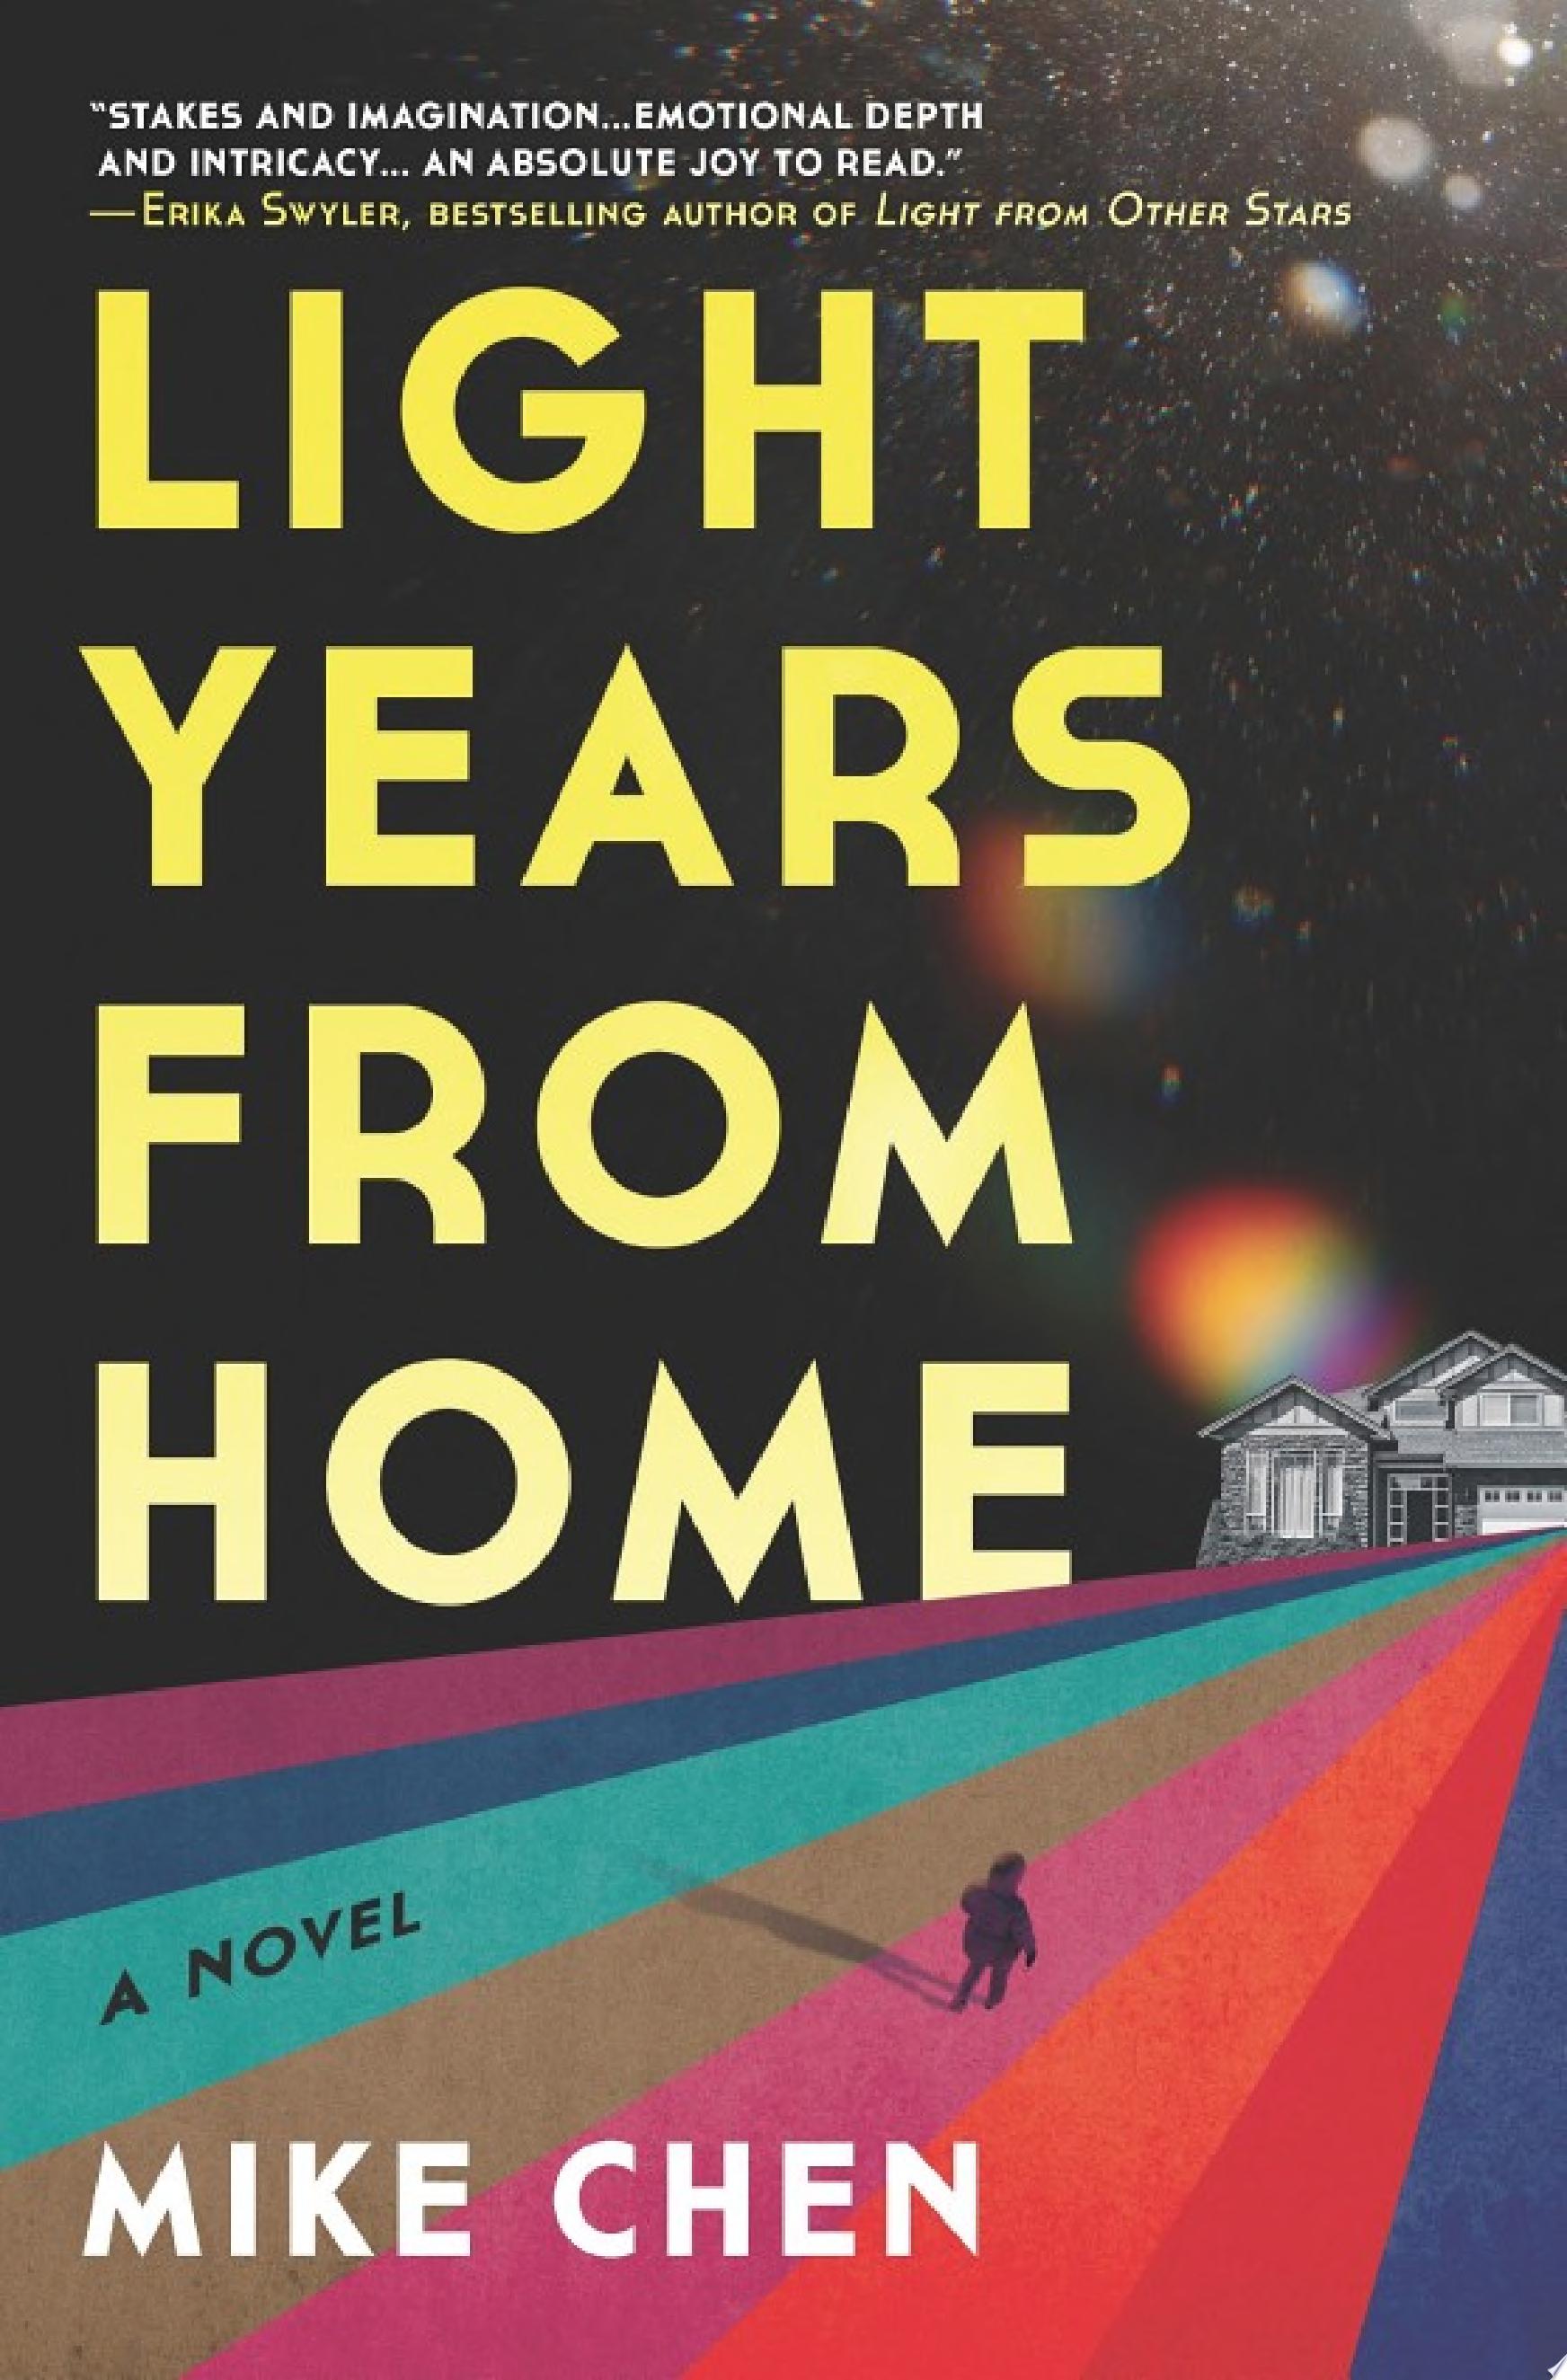 Image for "Light Years from Home"